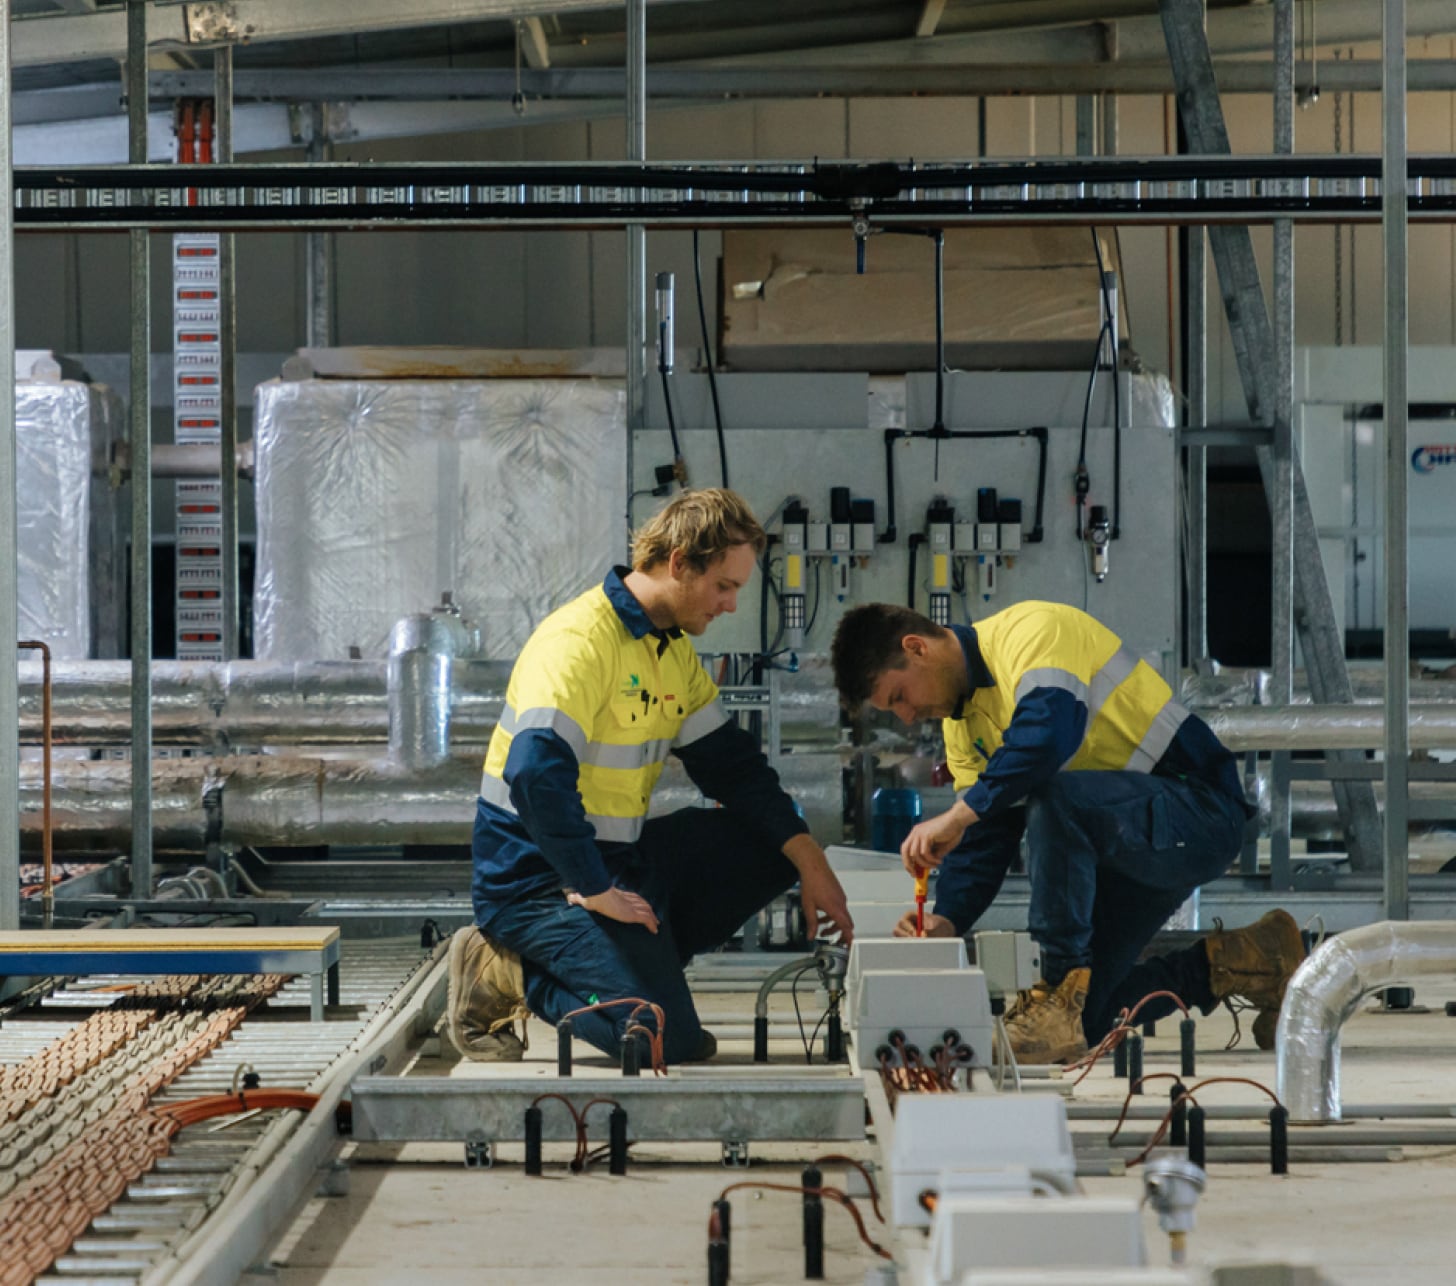 Two men work on electrical equipment on a factory floor